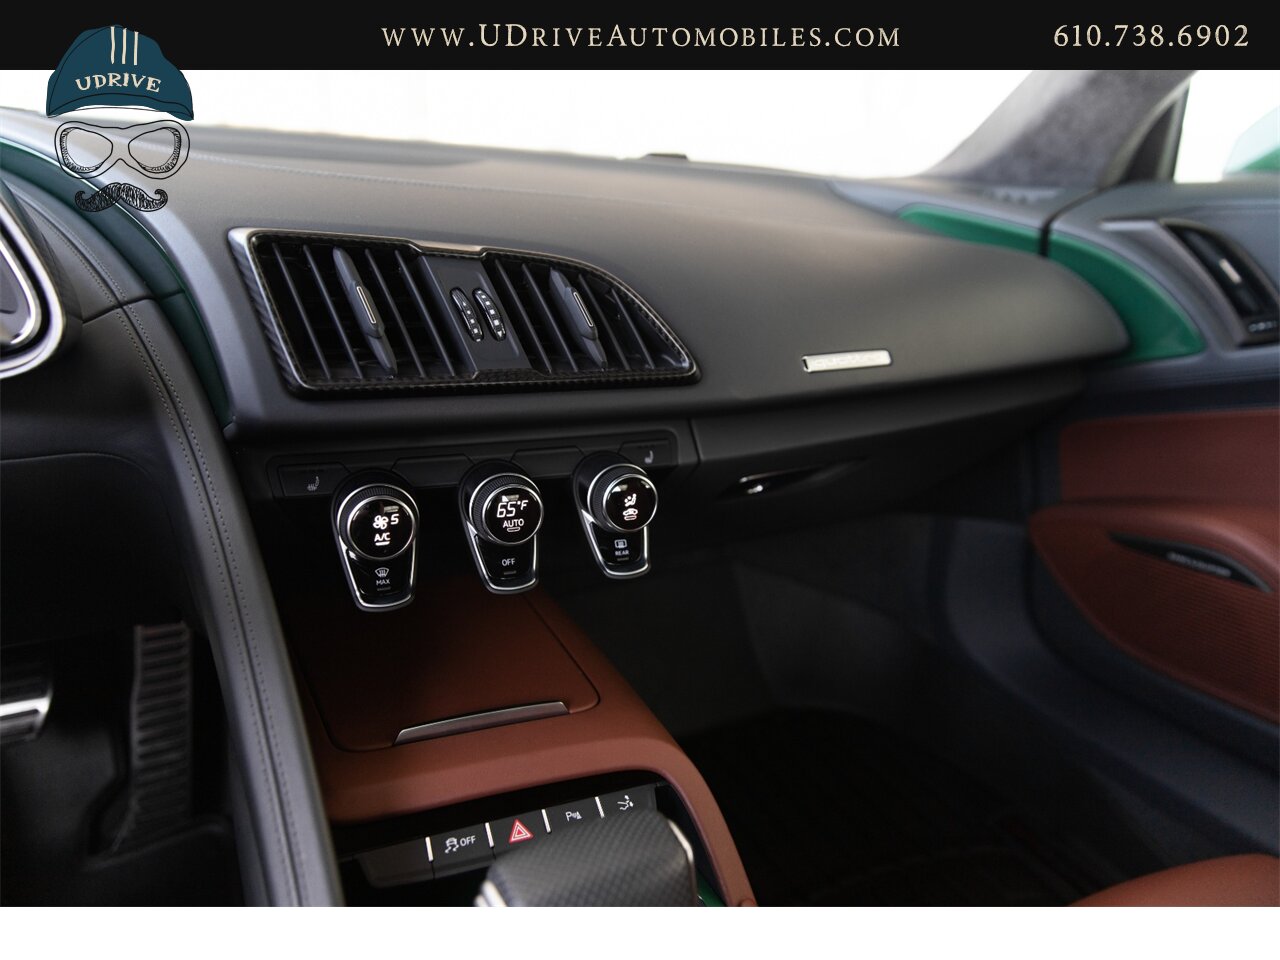 2017 Audi R8 Audi Exclusive Avocado Green Vermont Brown Leather  Diamond Stitching V10 Carbon Fiber - Photo 39 - West Chester, PA 19382